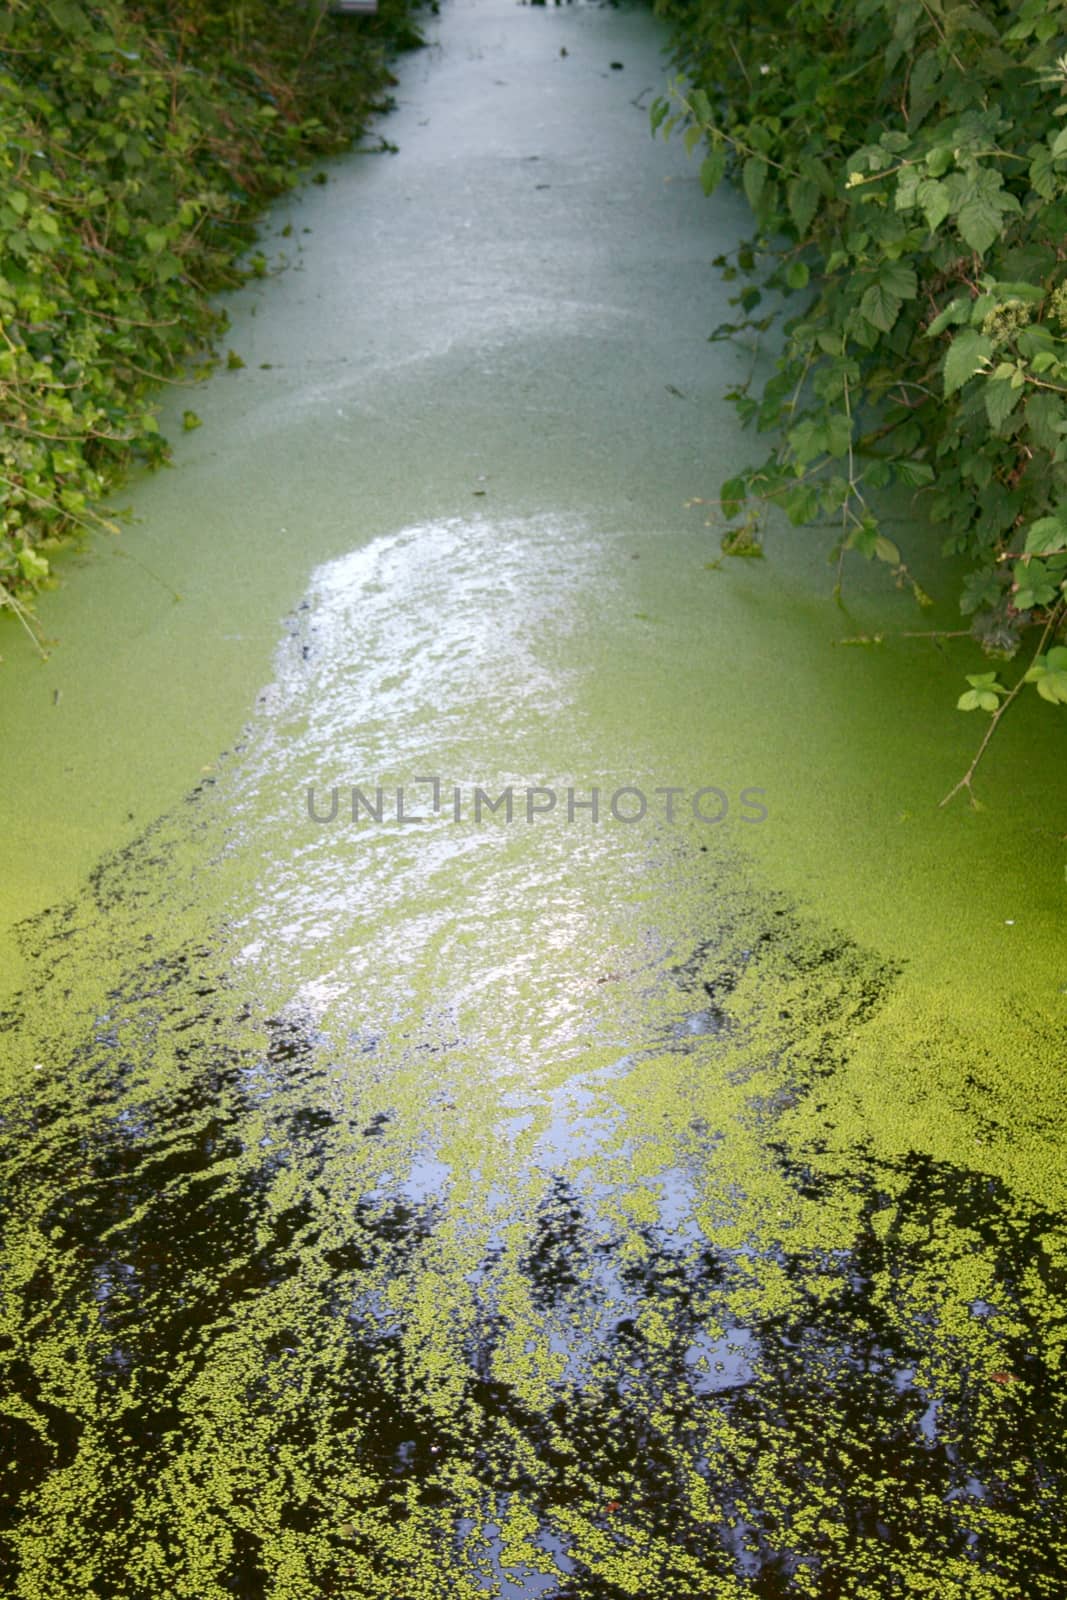 A watercourse partly covered with duckweed